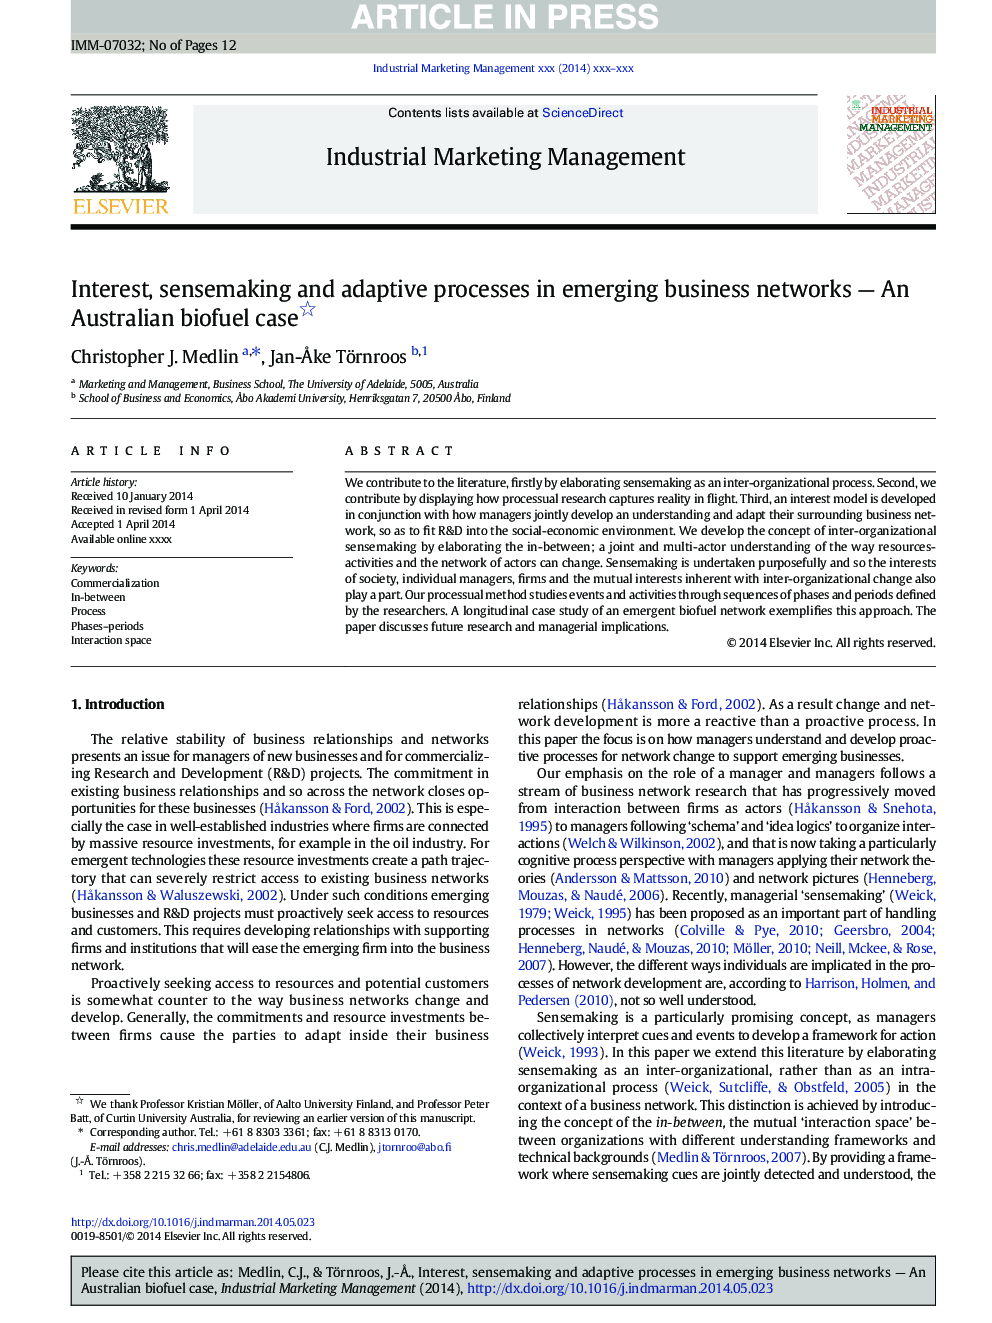 Interest, sensemaking and adaptive processes in emerging business networks - An Australian biofuel case